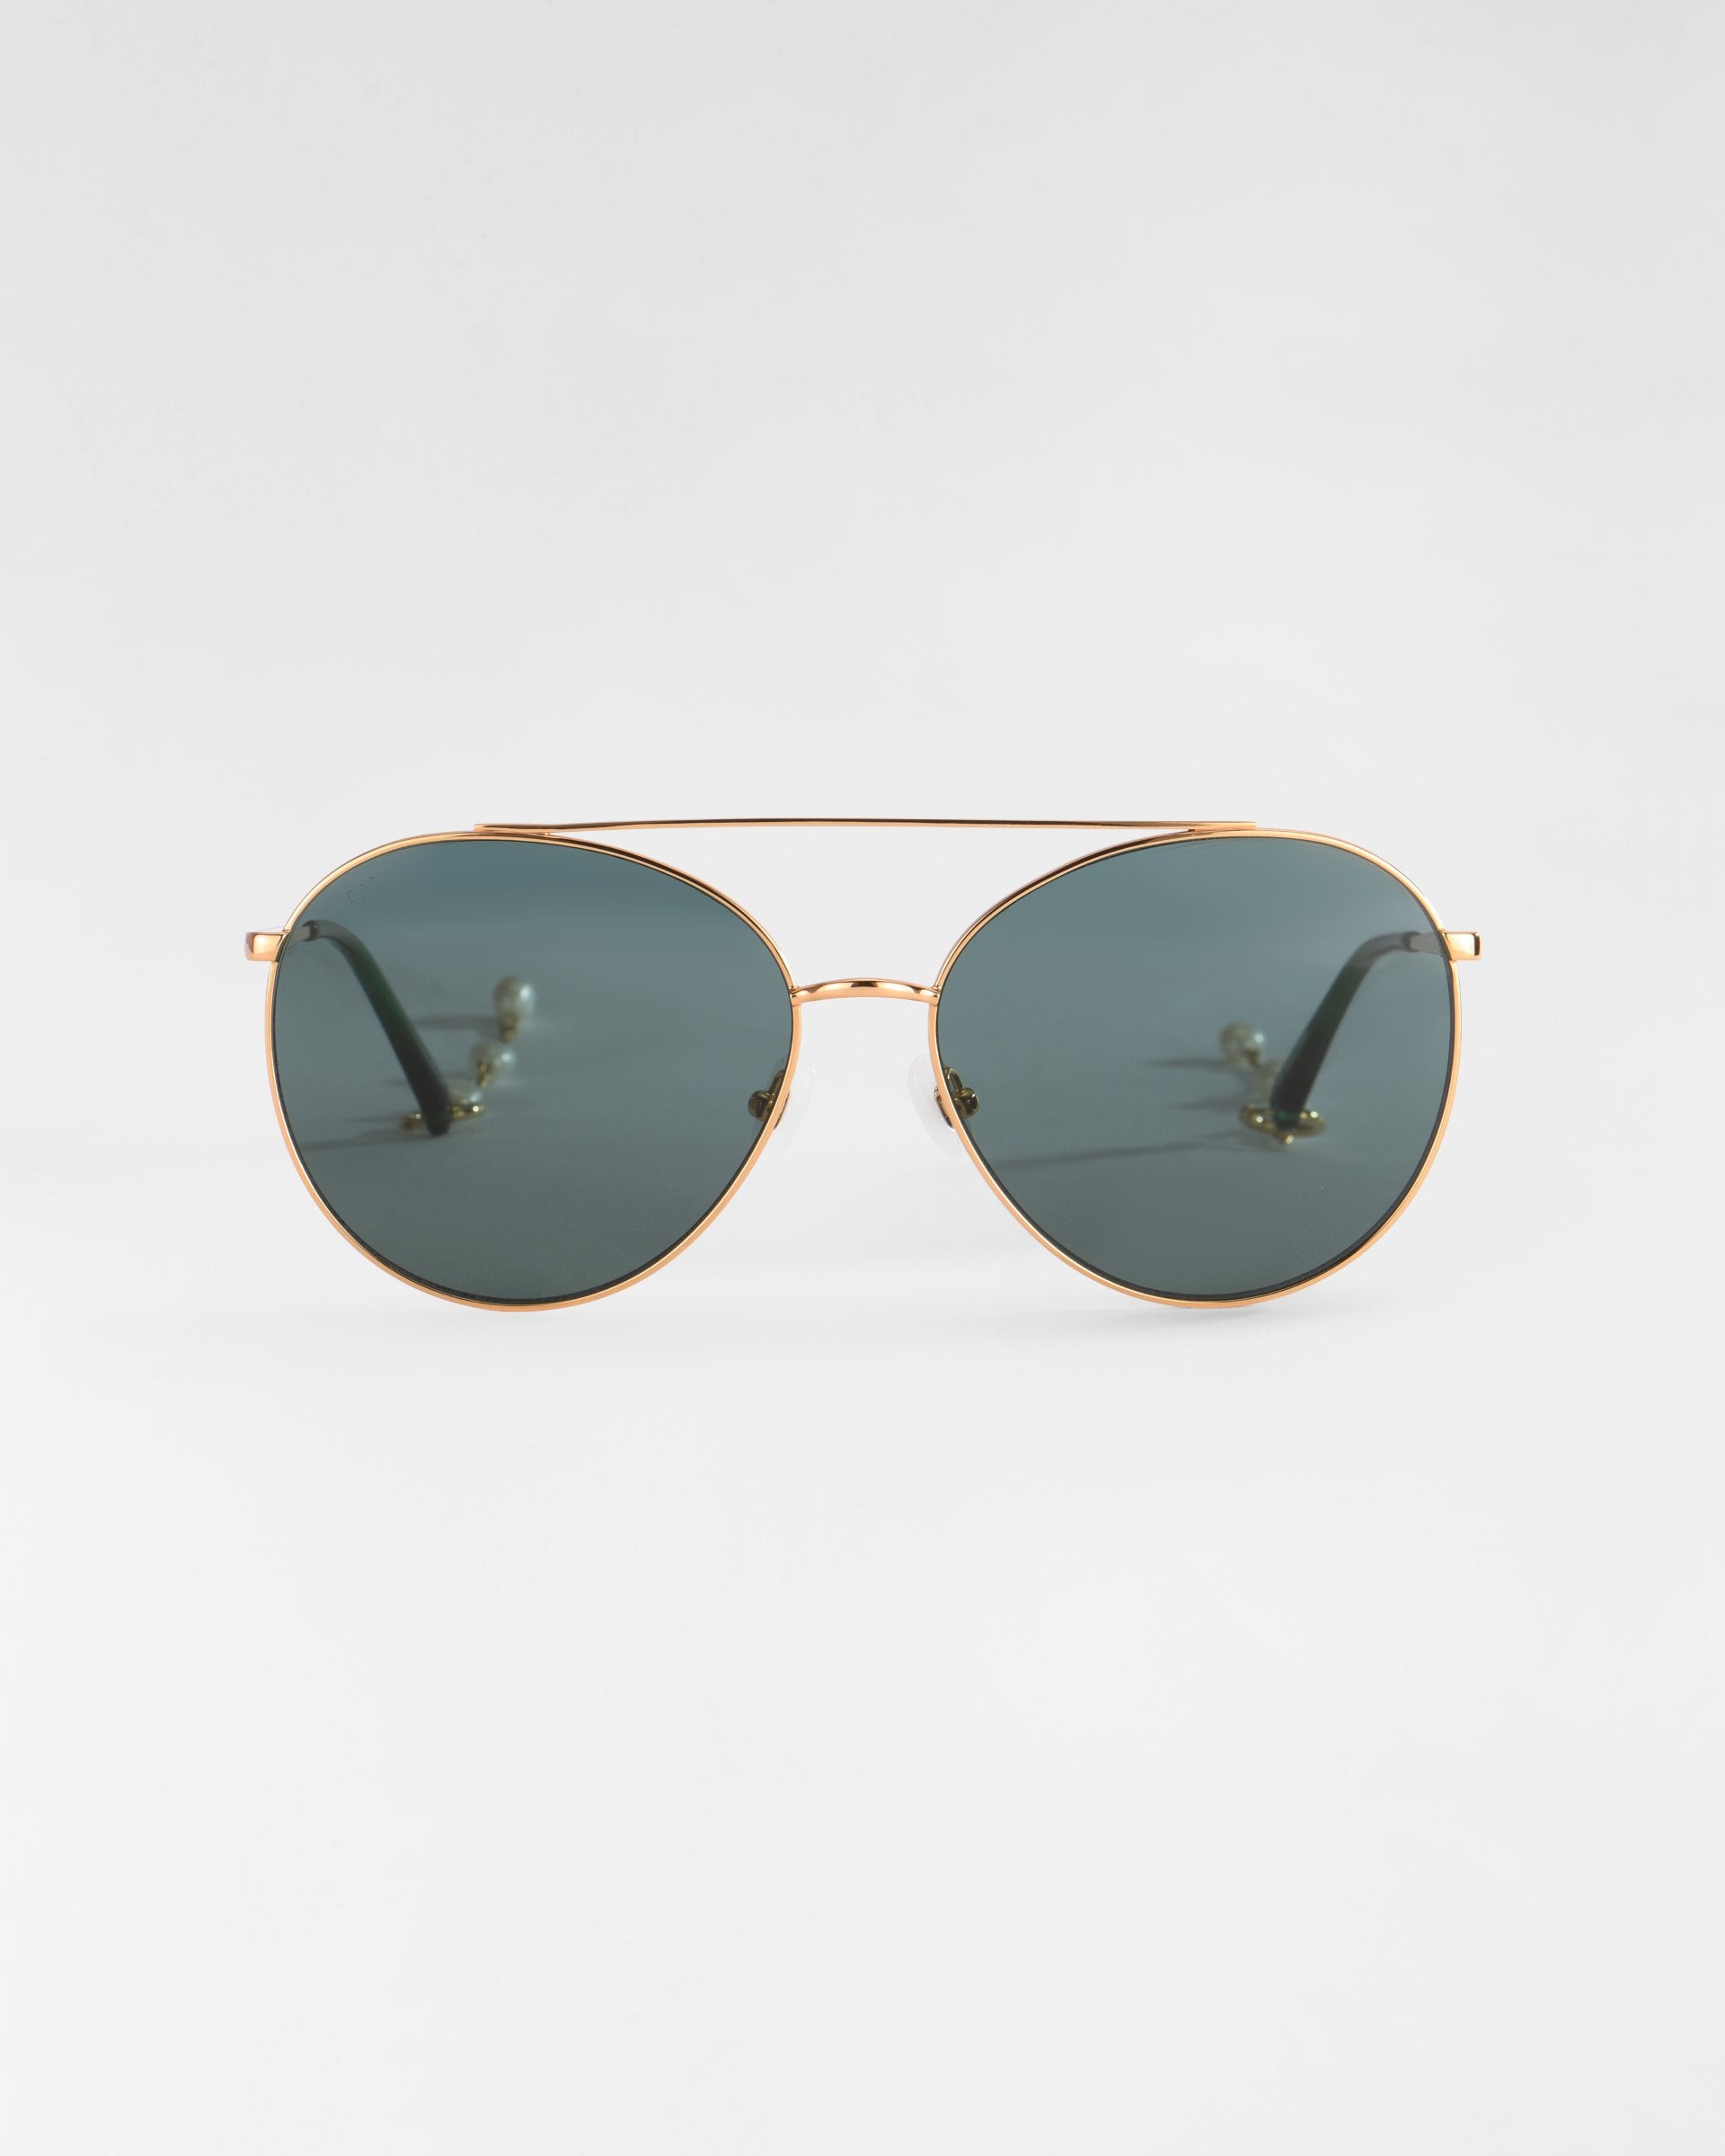 A pair of Yoyo sunglasses by For Art&#39;s Sake® with thin, 18k gold-plated frames and dark green lenses is displayed against a plain white background.